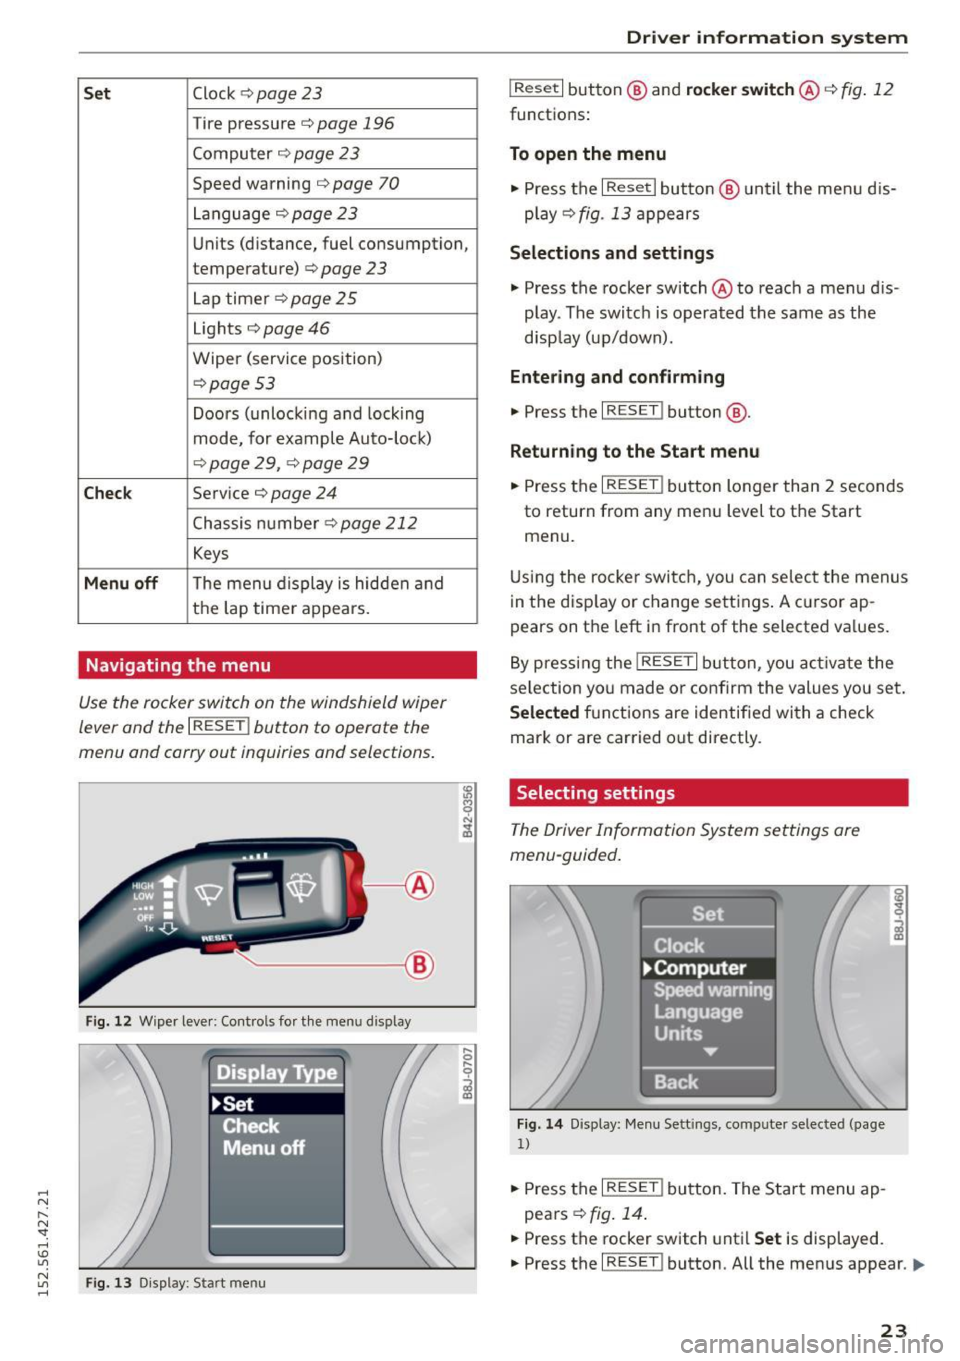 AUDI R8 SPYDER 2015  Owners Manual .... N 
l­
N "1: rl I.O 
" N 
" .... 
Set Clock ¢ page  23 
Tire  pressure c::> page  196 
Computer c::> page  2 3 
Speed  warning c::> page  70 
Language c::>page23 
Units  (distance,  fuel  con